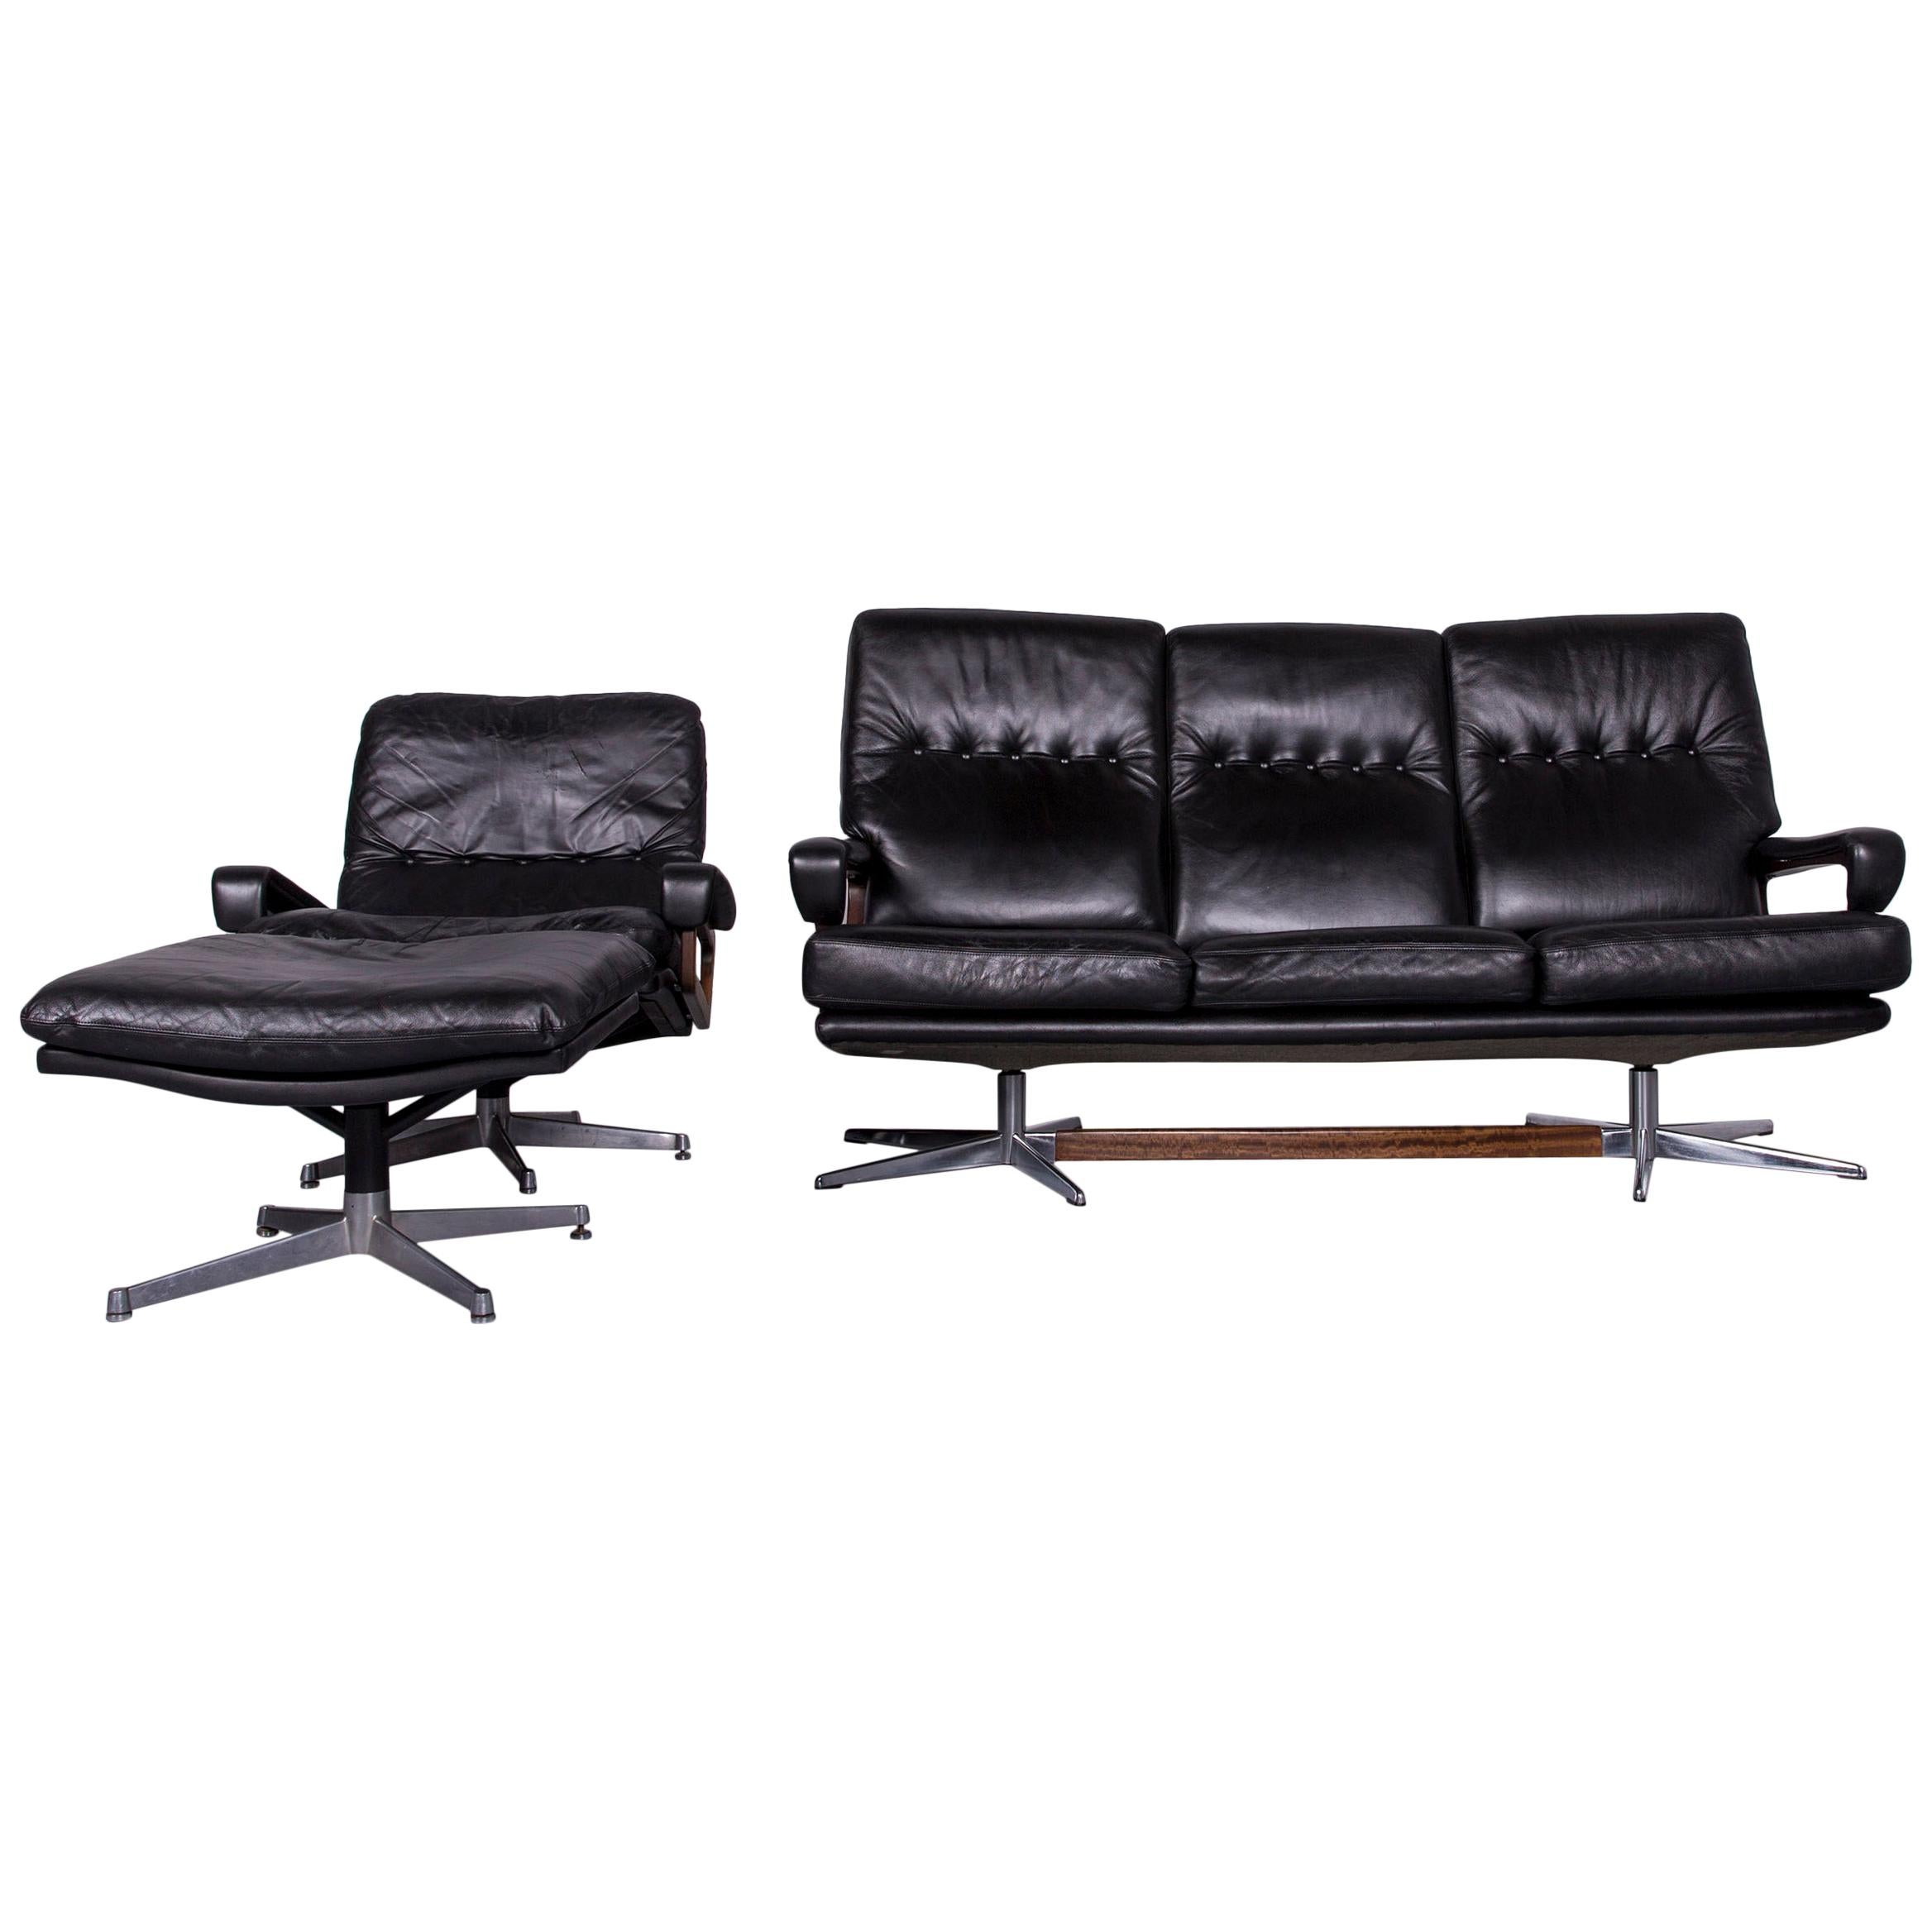 Strässle King Designer Black Leather Set: Armchair, Footstool, Three-Seat Couch